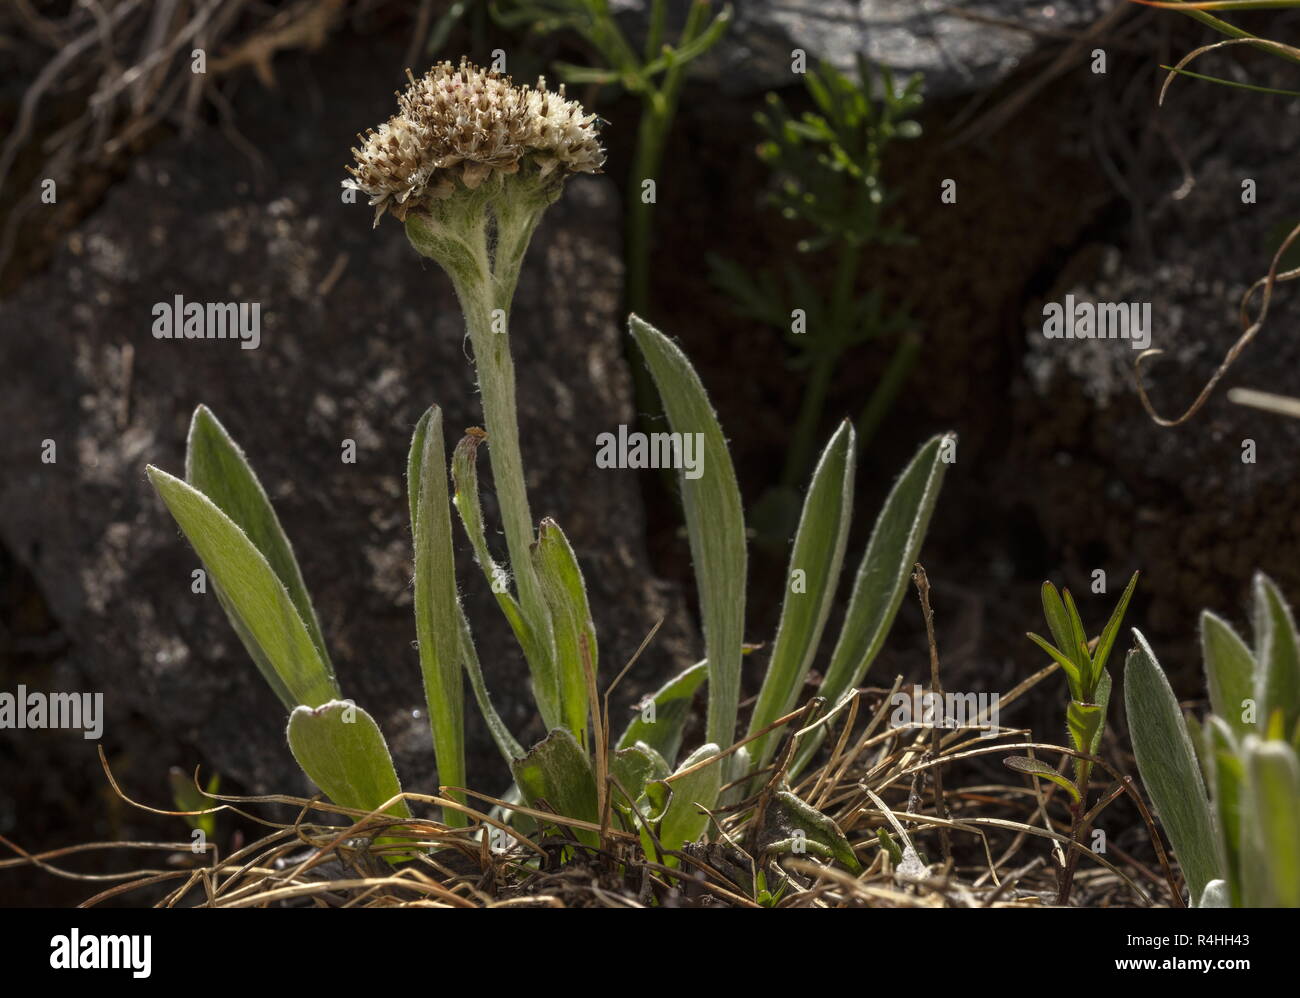 Carpathian everlasting, Antennaria carpatica in flower high in the Swiss Alps. Stock Photo